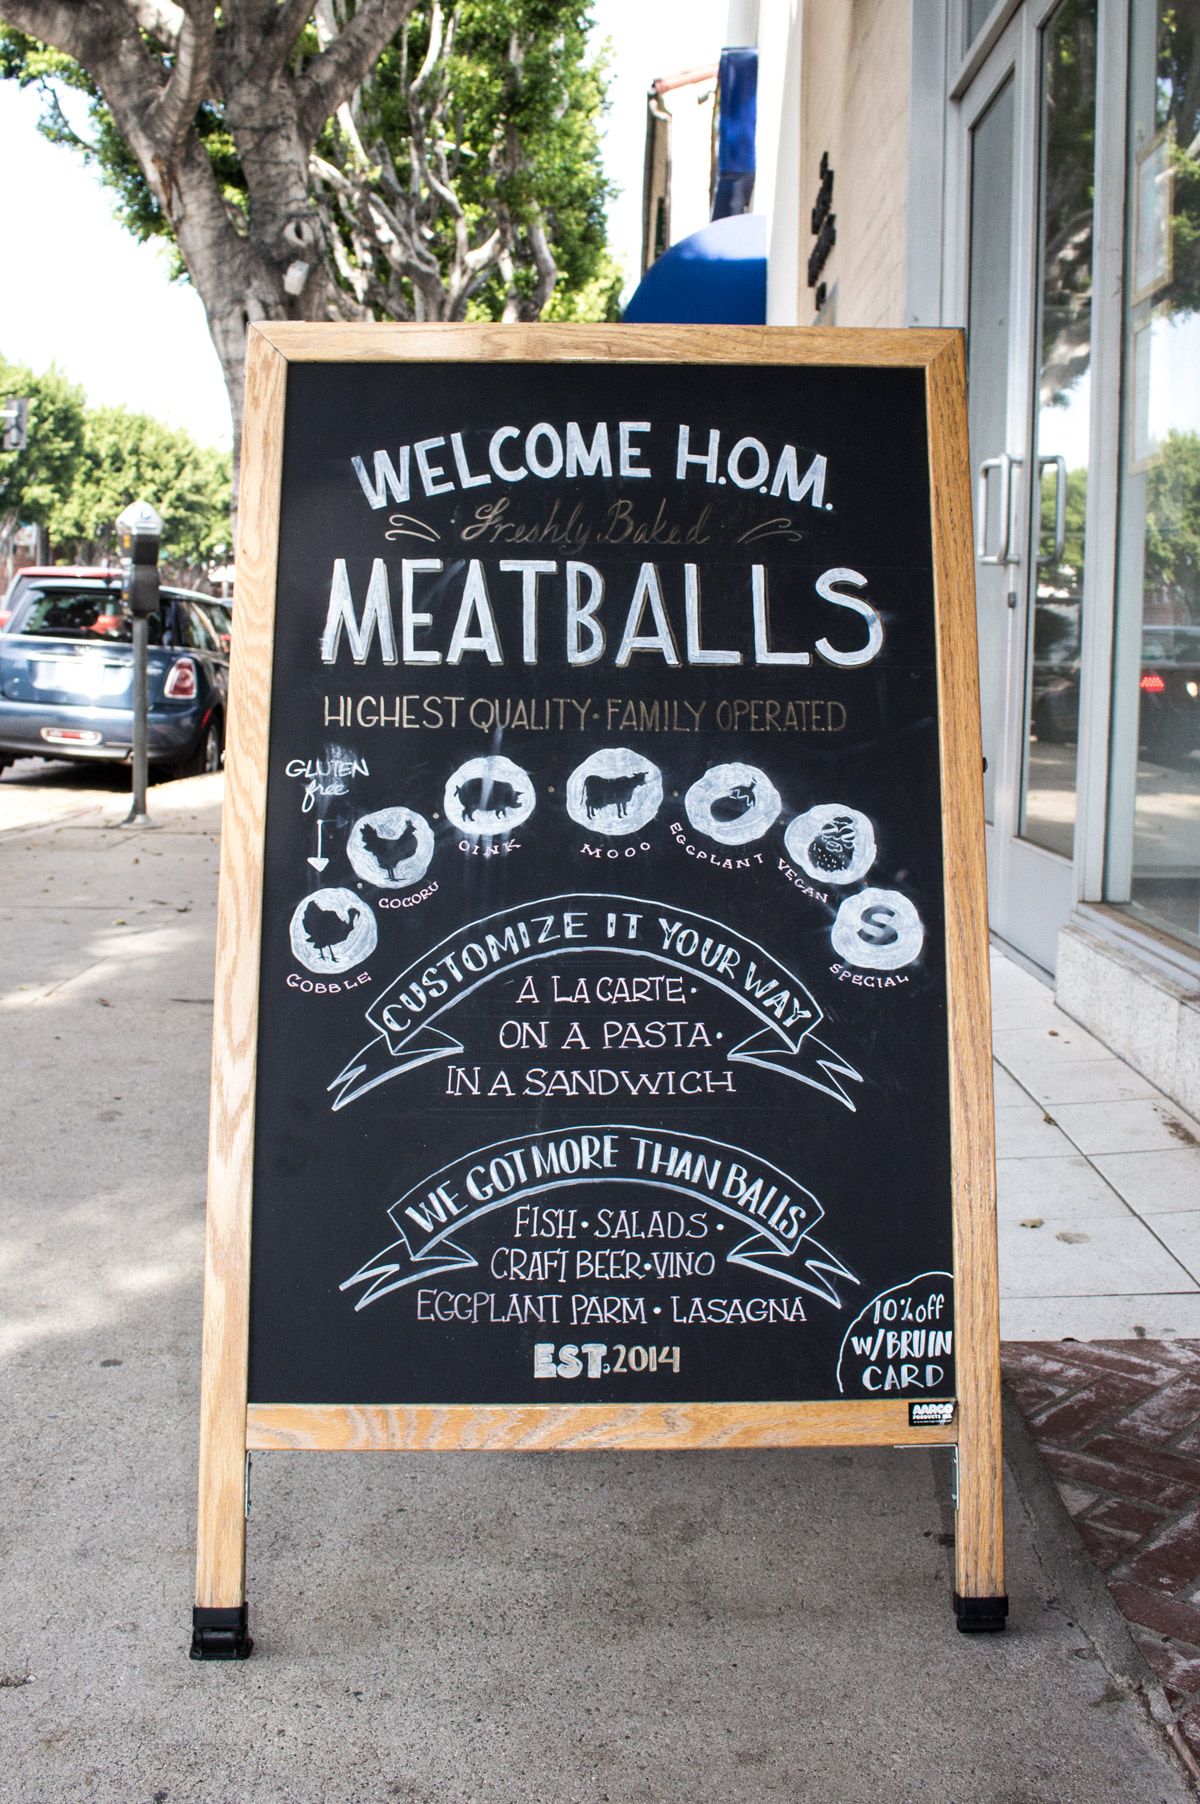 House of Meatballs